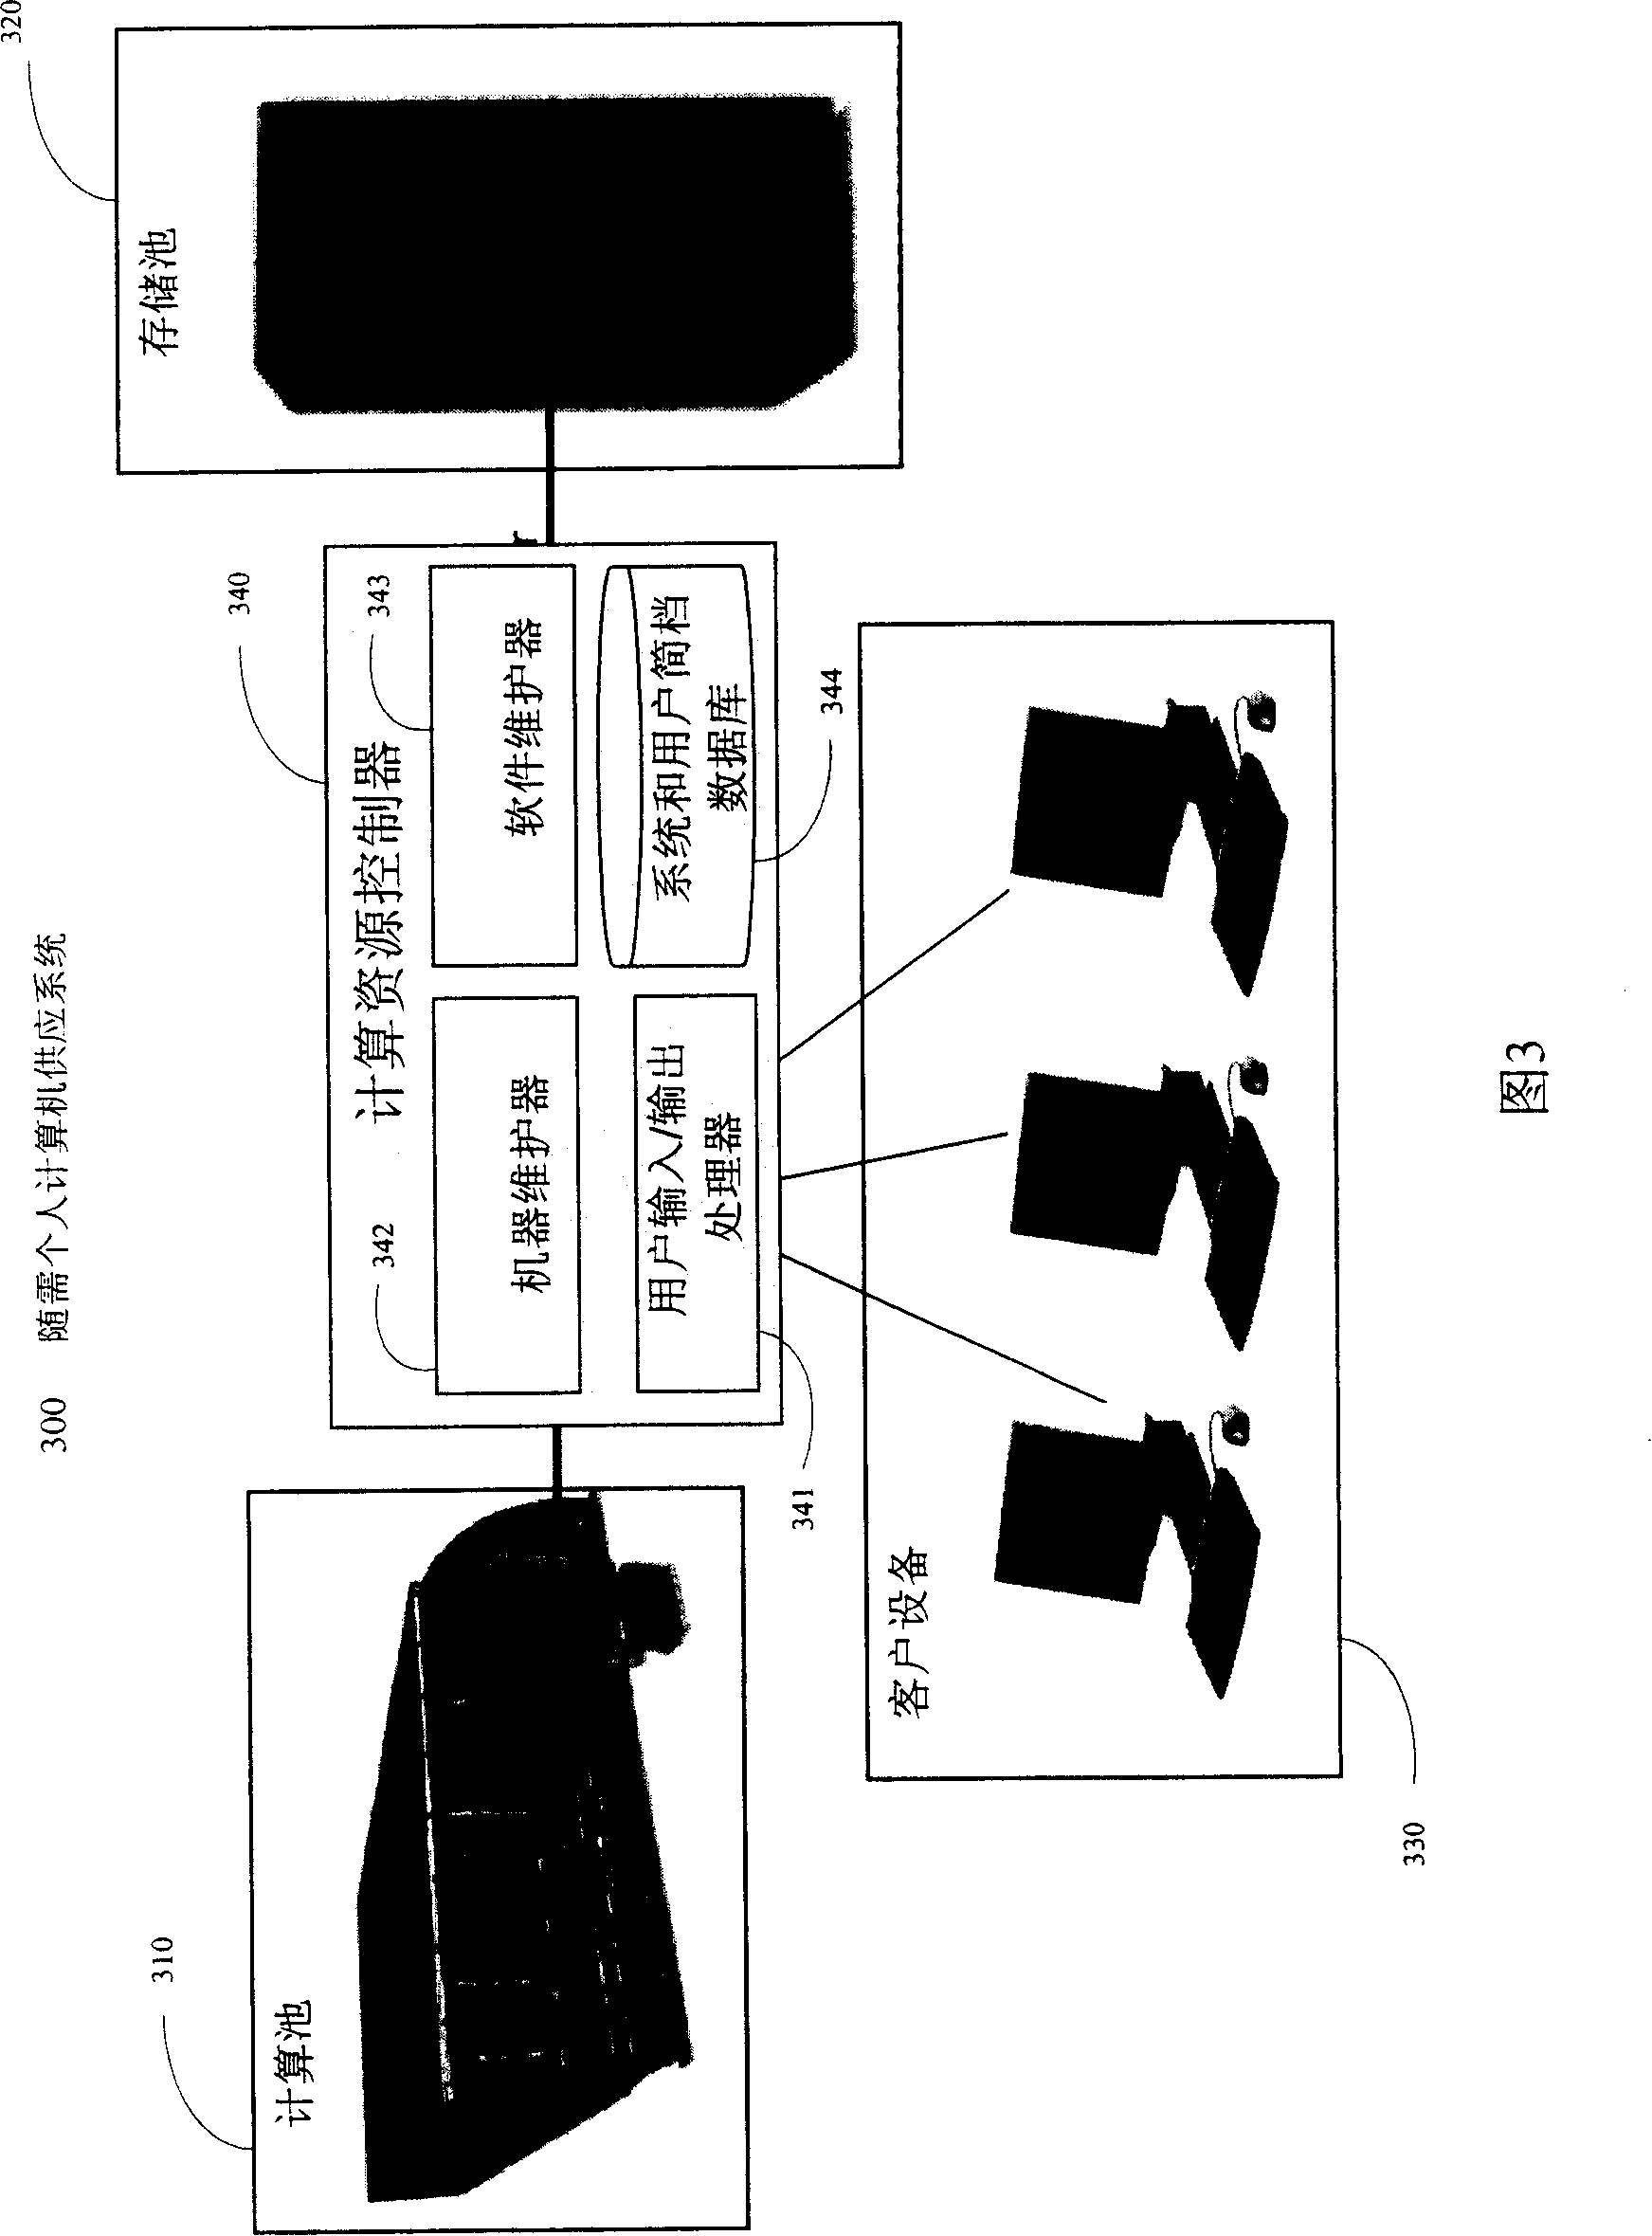 Personal computer supply system on demand and method